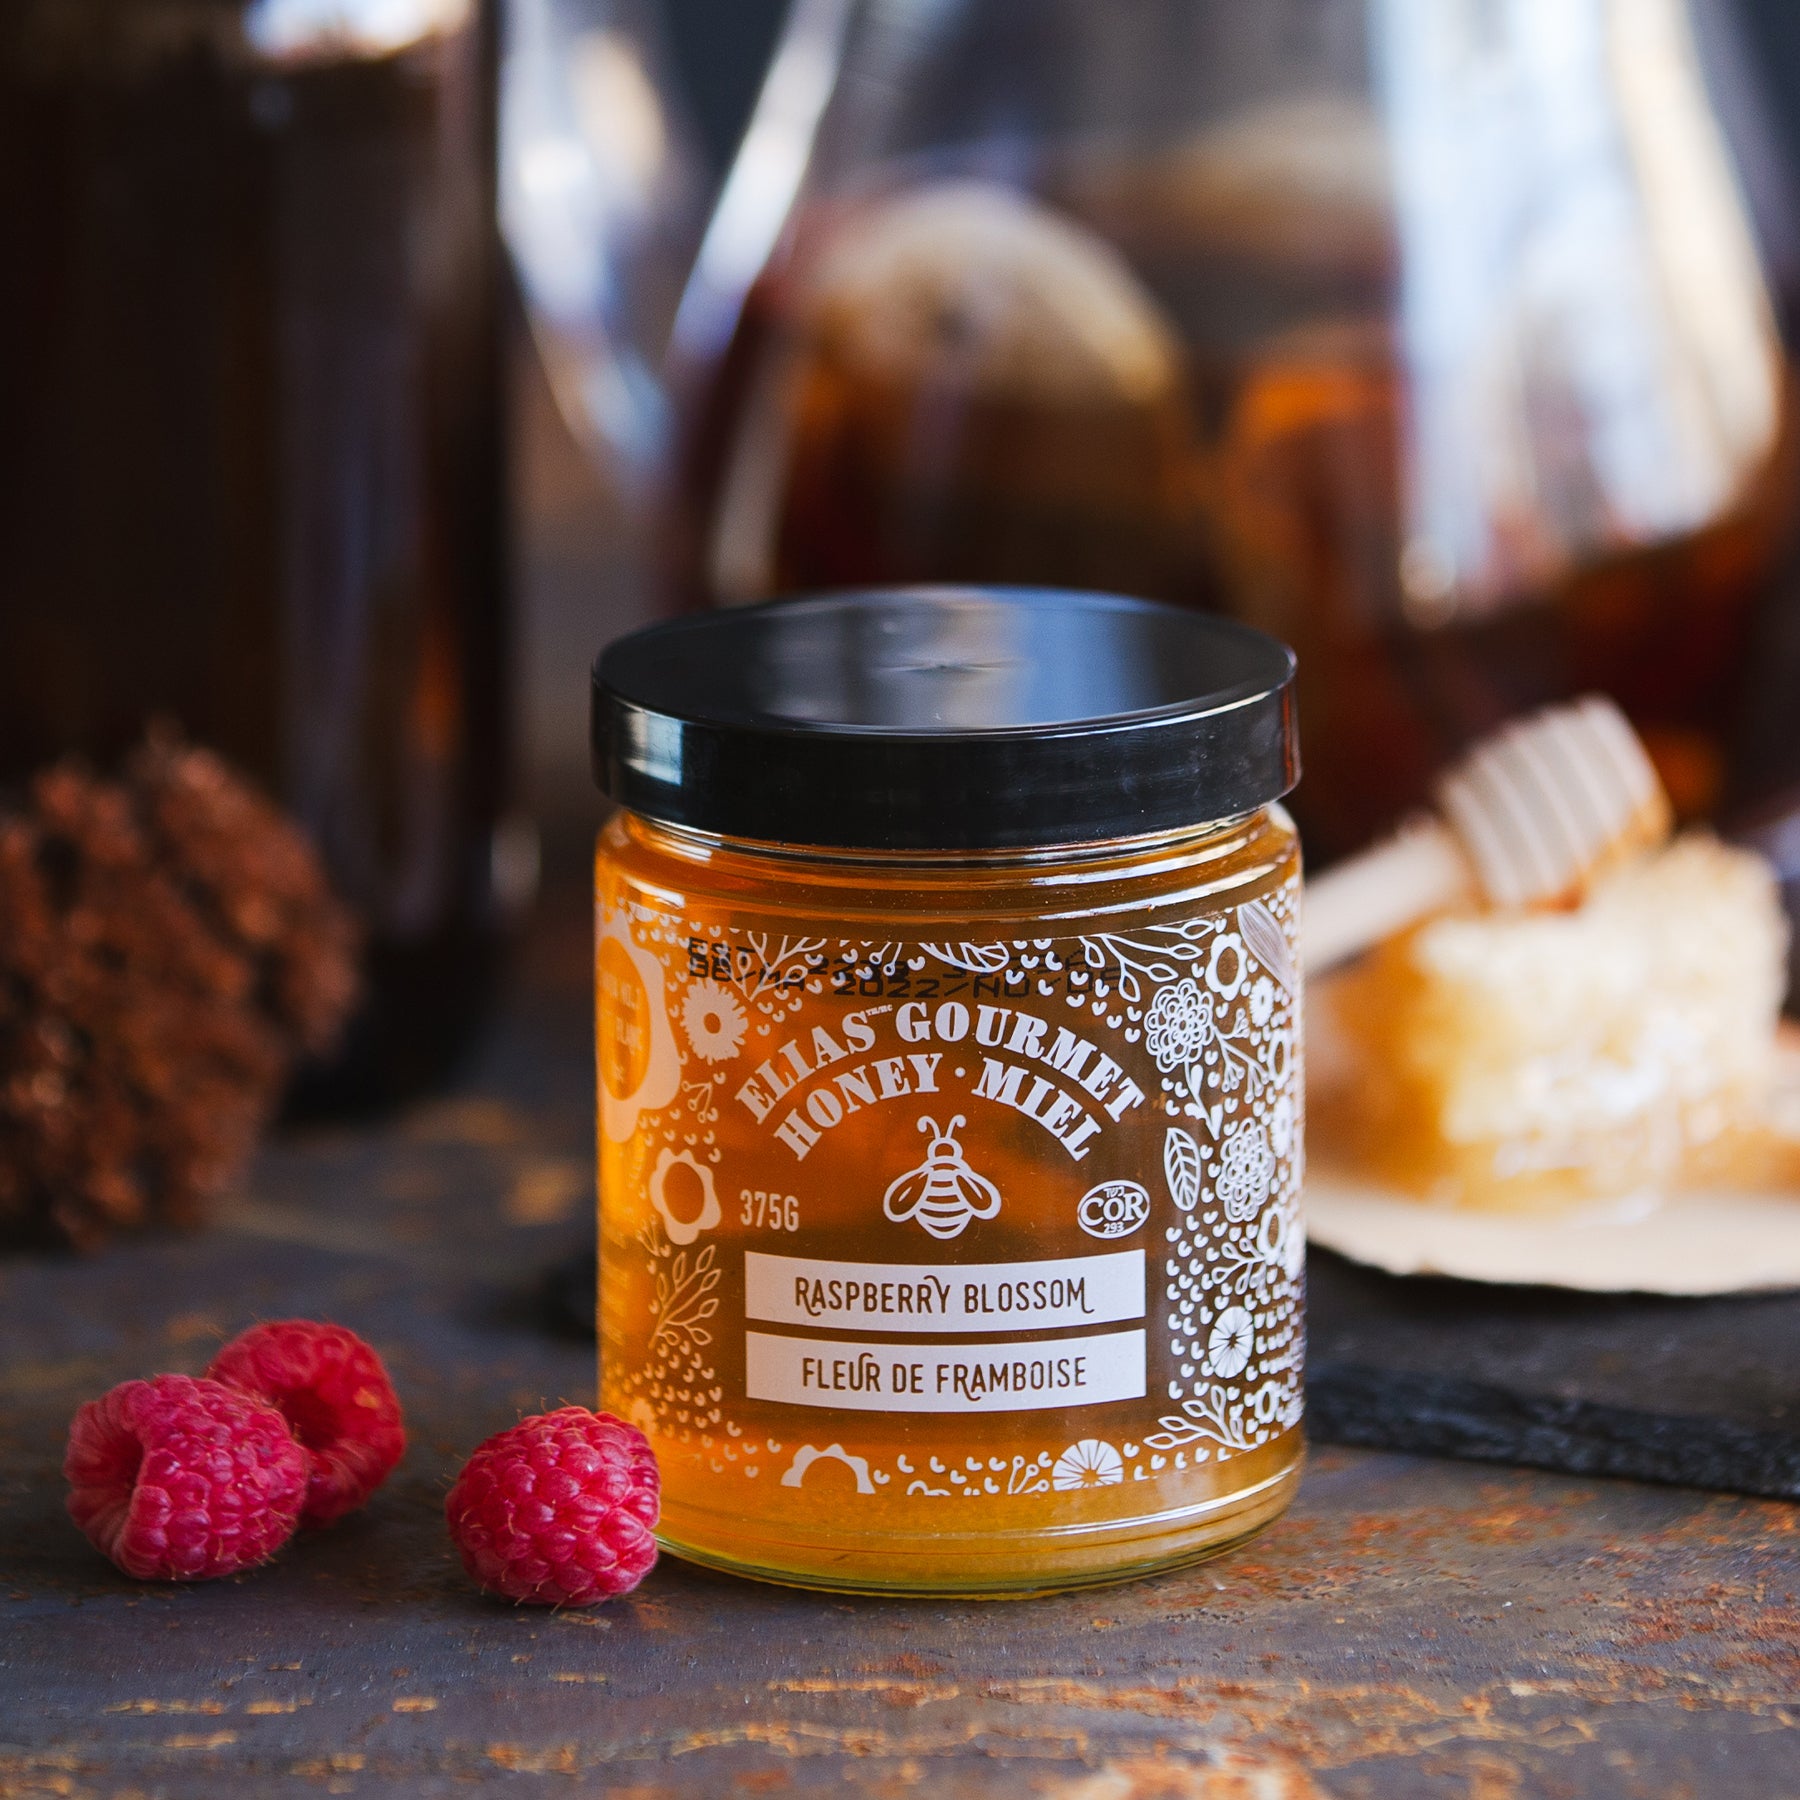 Elias Gourmet Raspberry Blossom Honey Jar with raspberries and honey stick in honeycomb in the background.